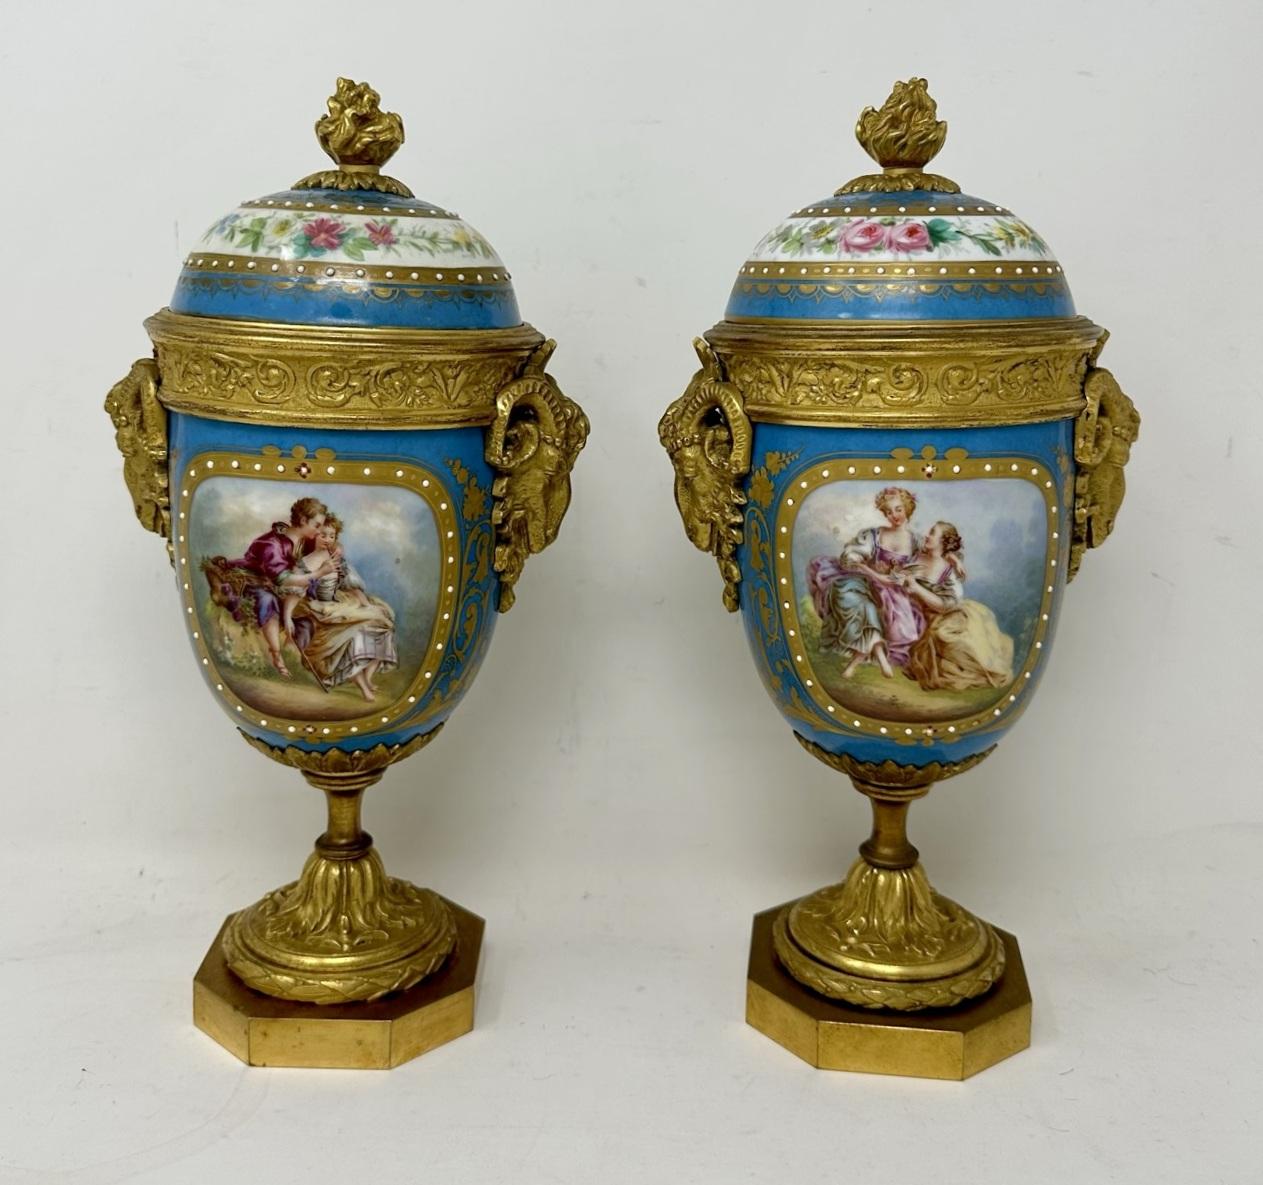 Late Victorian Antique Pair of French Sèvres Porcelain Ormolu Mounted Urns Vases Centerpiece